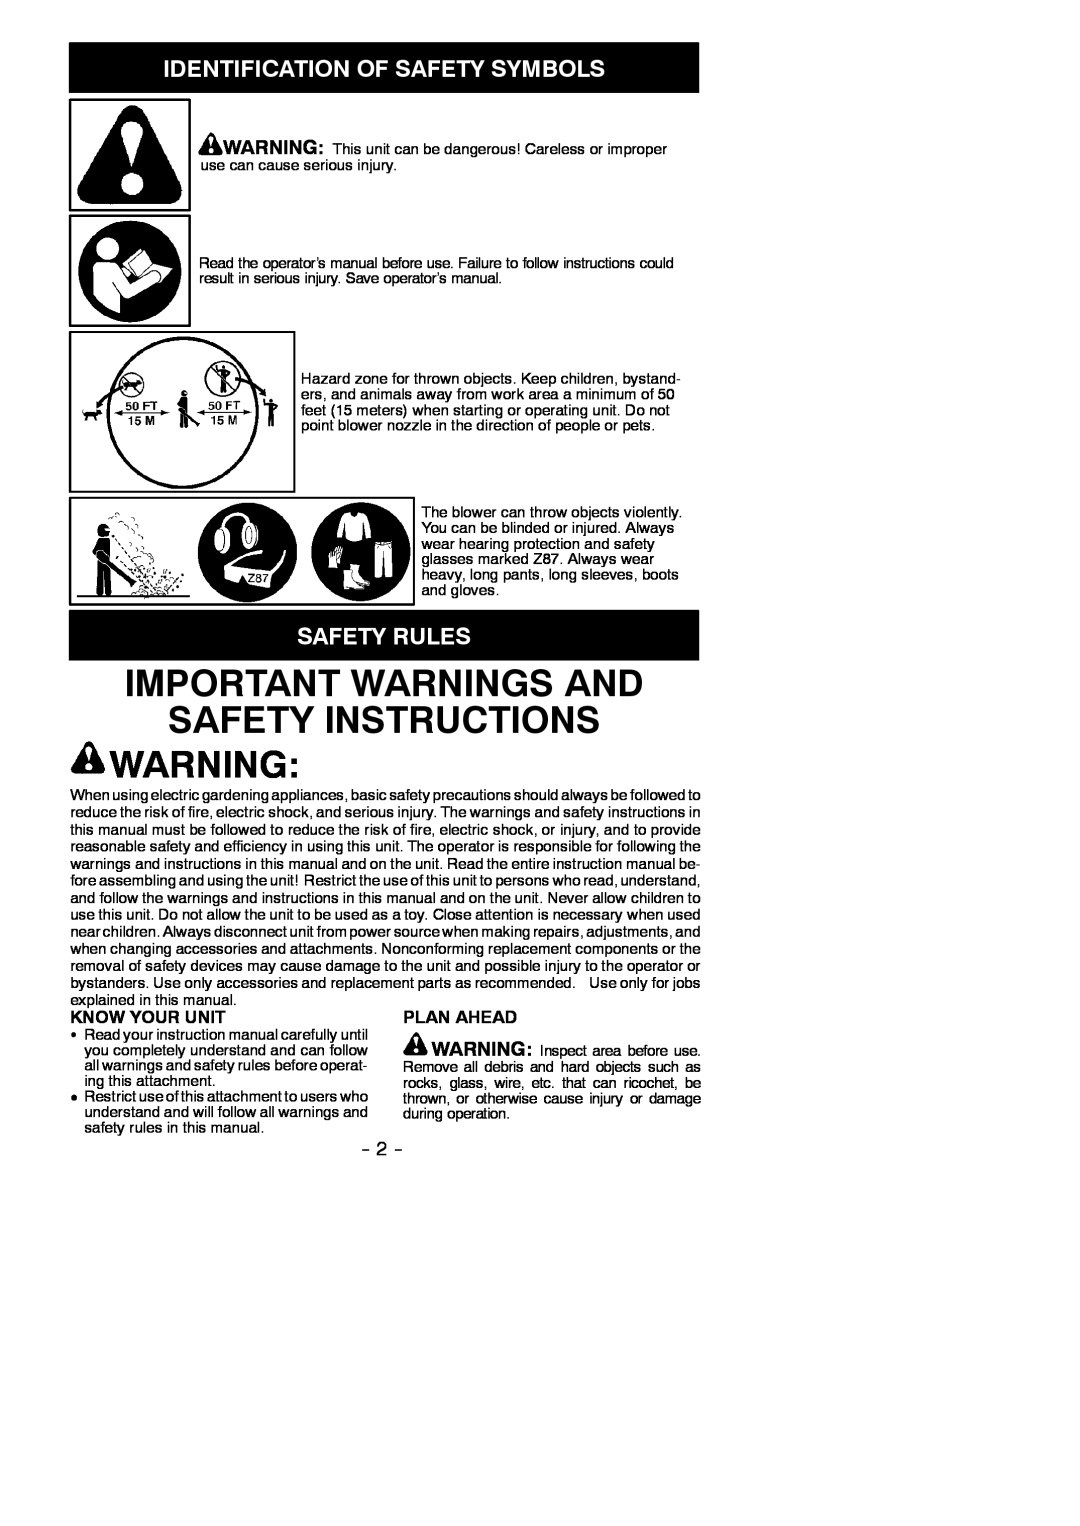 Poulan 545212827 Important Warnings And, Safety Instructions Warning, Identification Of Safety Symbols, Safety Rules 